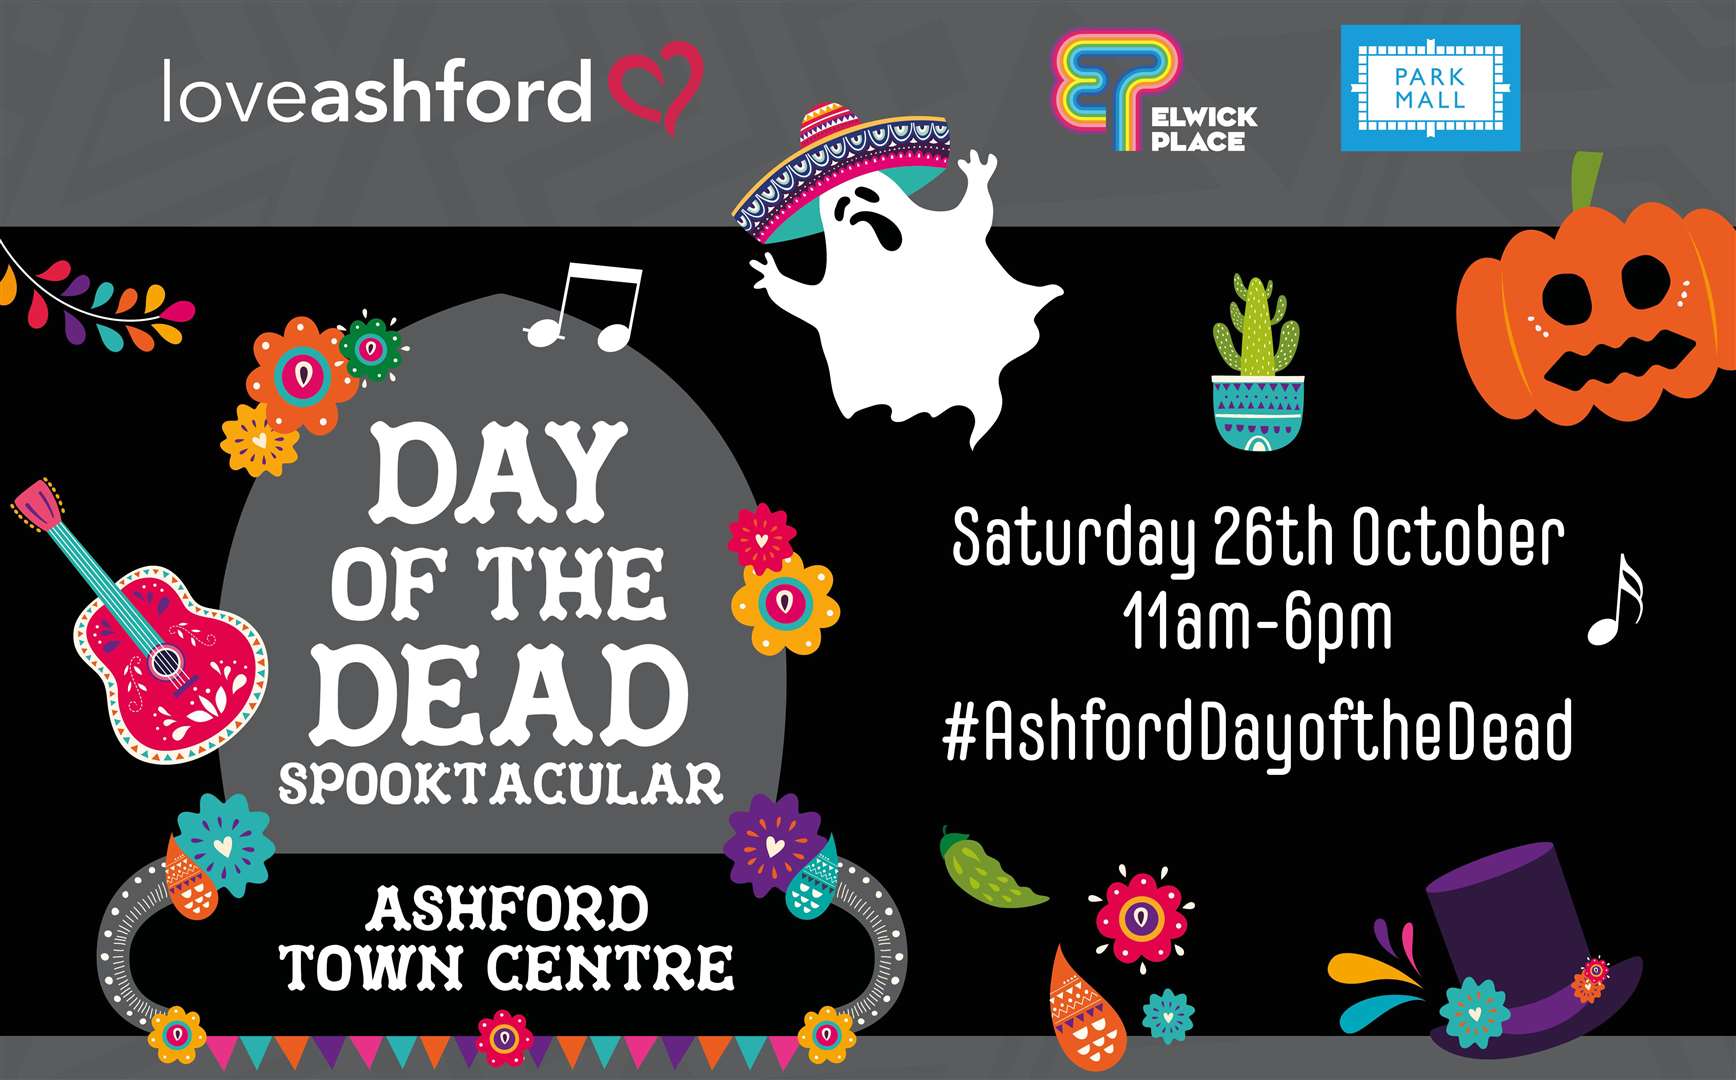 If you’re looking for ways to keep the kids entertained during half term, join Loveashford for a free Halloween celebration across Ashford Town Centre on Saturday, October 25 between 11am and 6pm